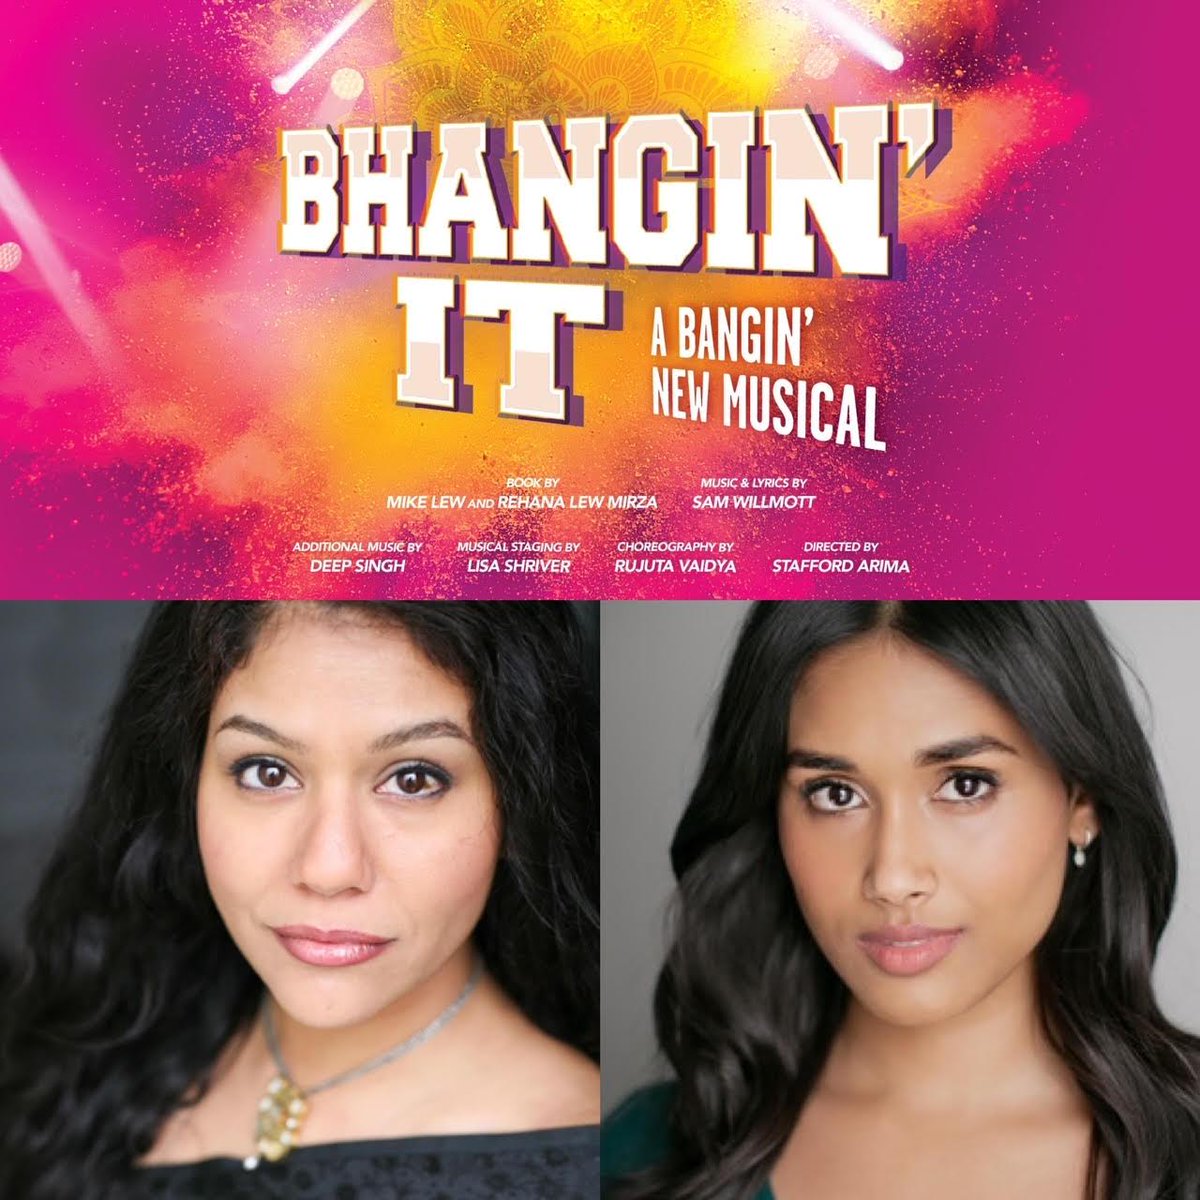 Wishing a Happy Opening Week to Alka Nayyar and Vinithra Raj on opening Bhangin' It at The La Jolla Playhouse this week! The show is featured on the front page of the New York Times art section this week! 
#BhanginIt